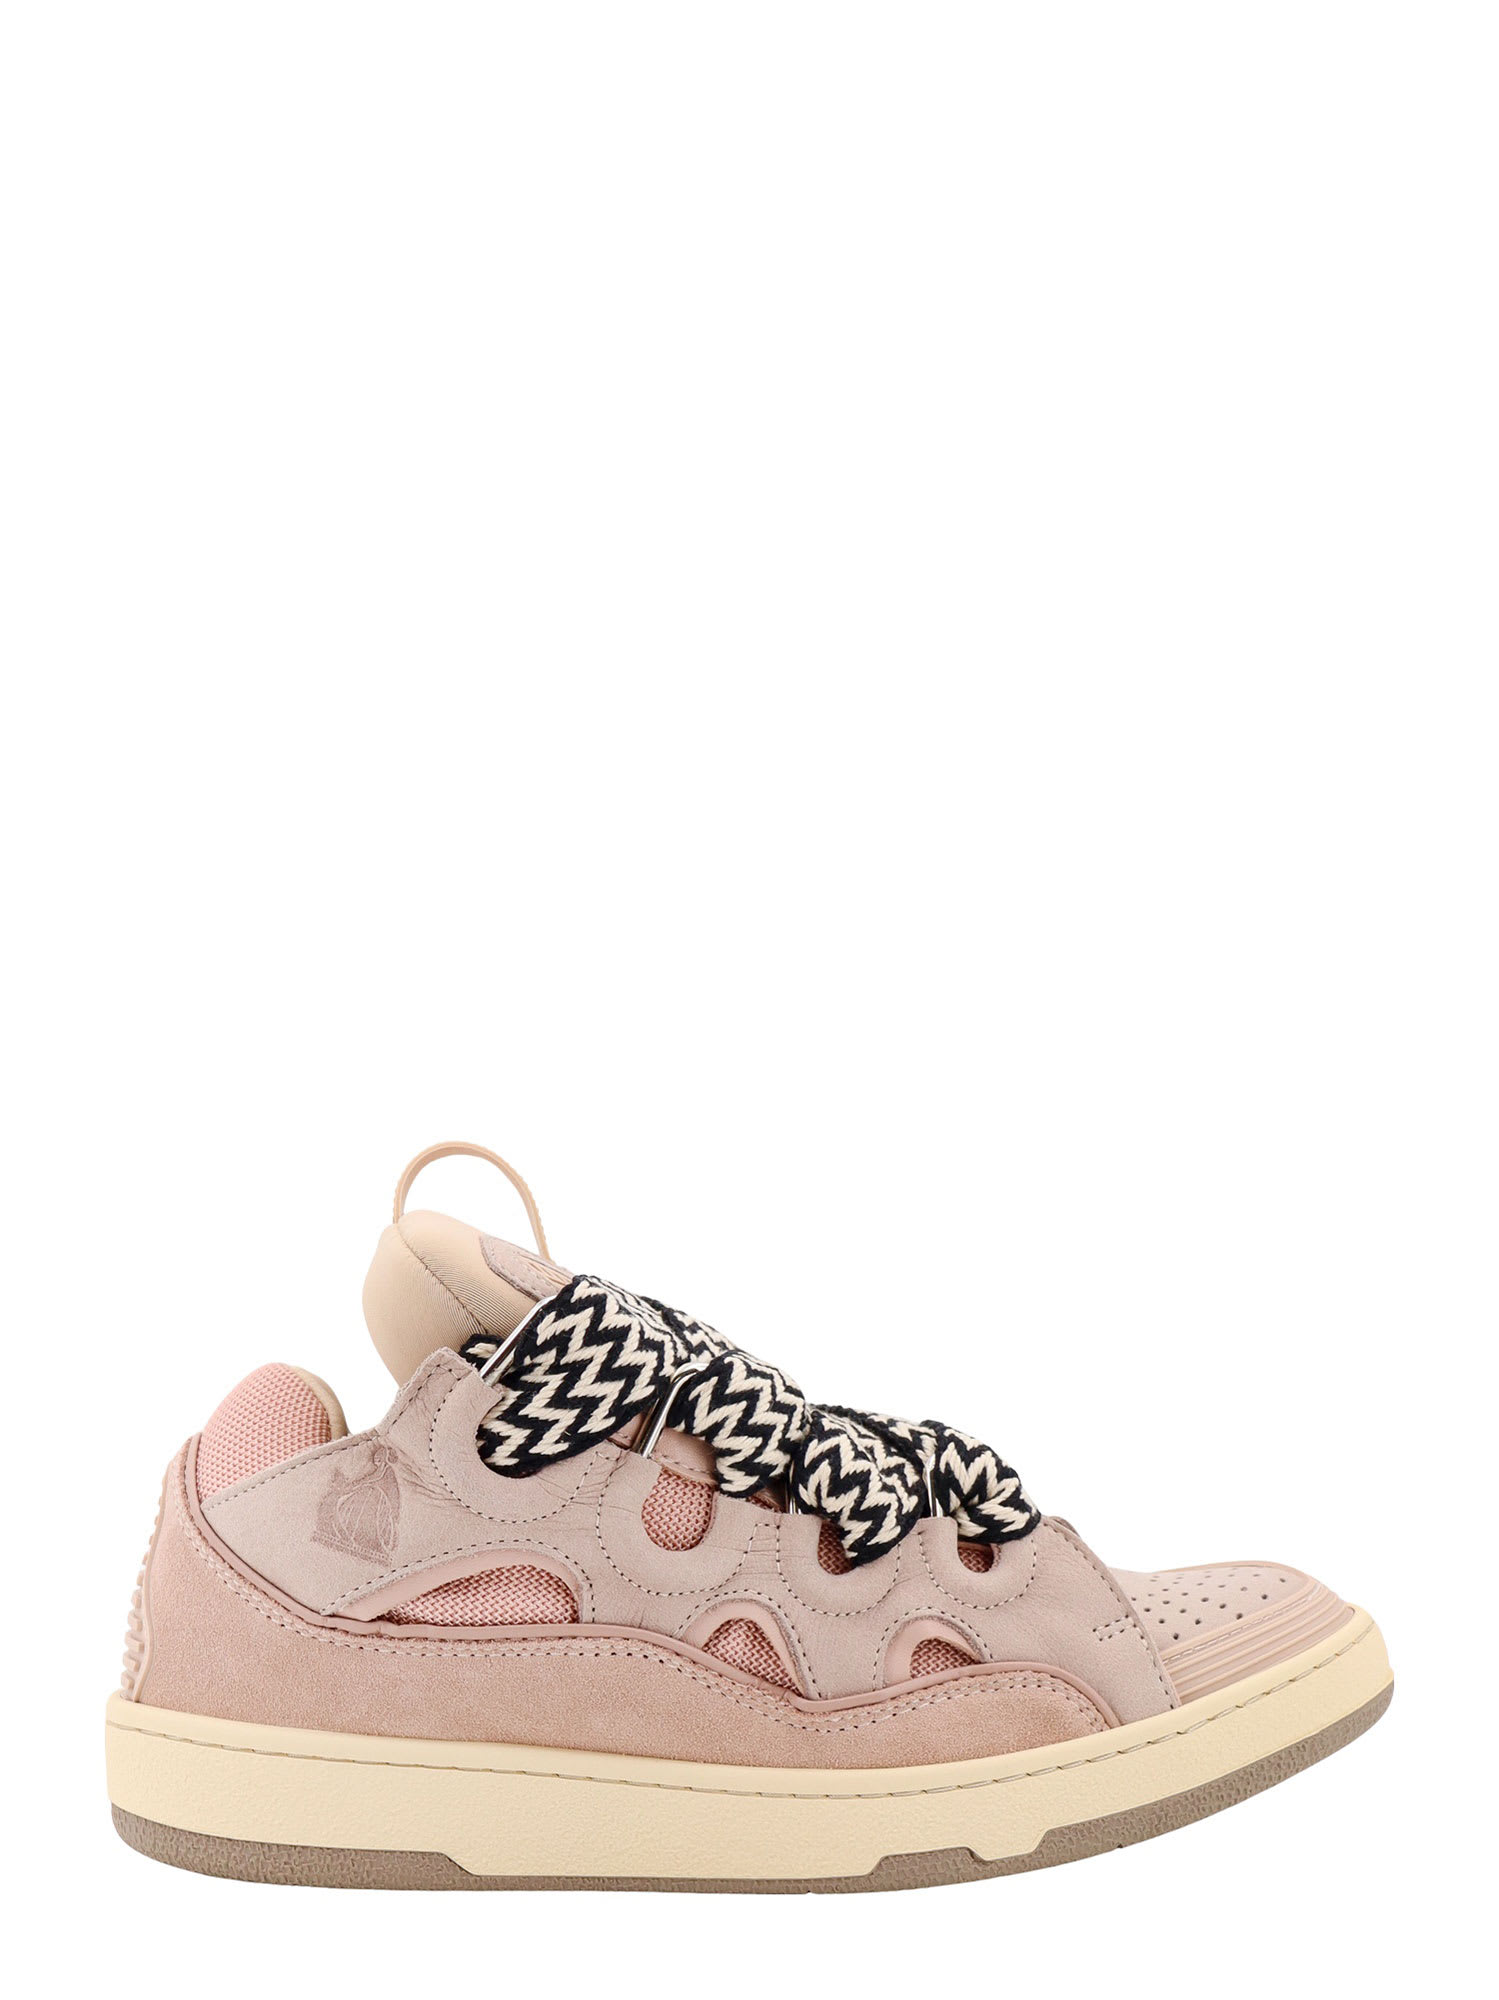 Lanvin Curb Sneakers In Pink